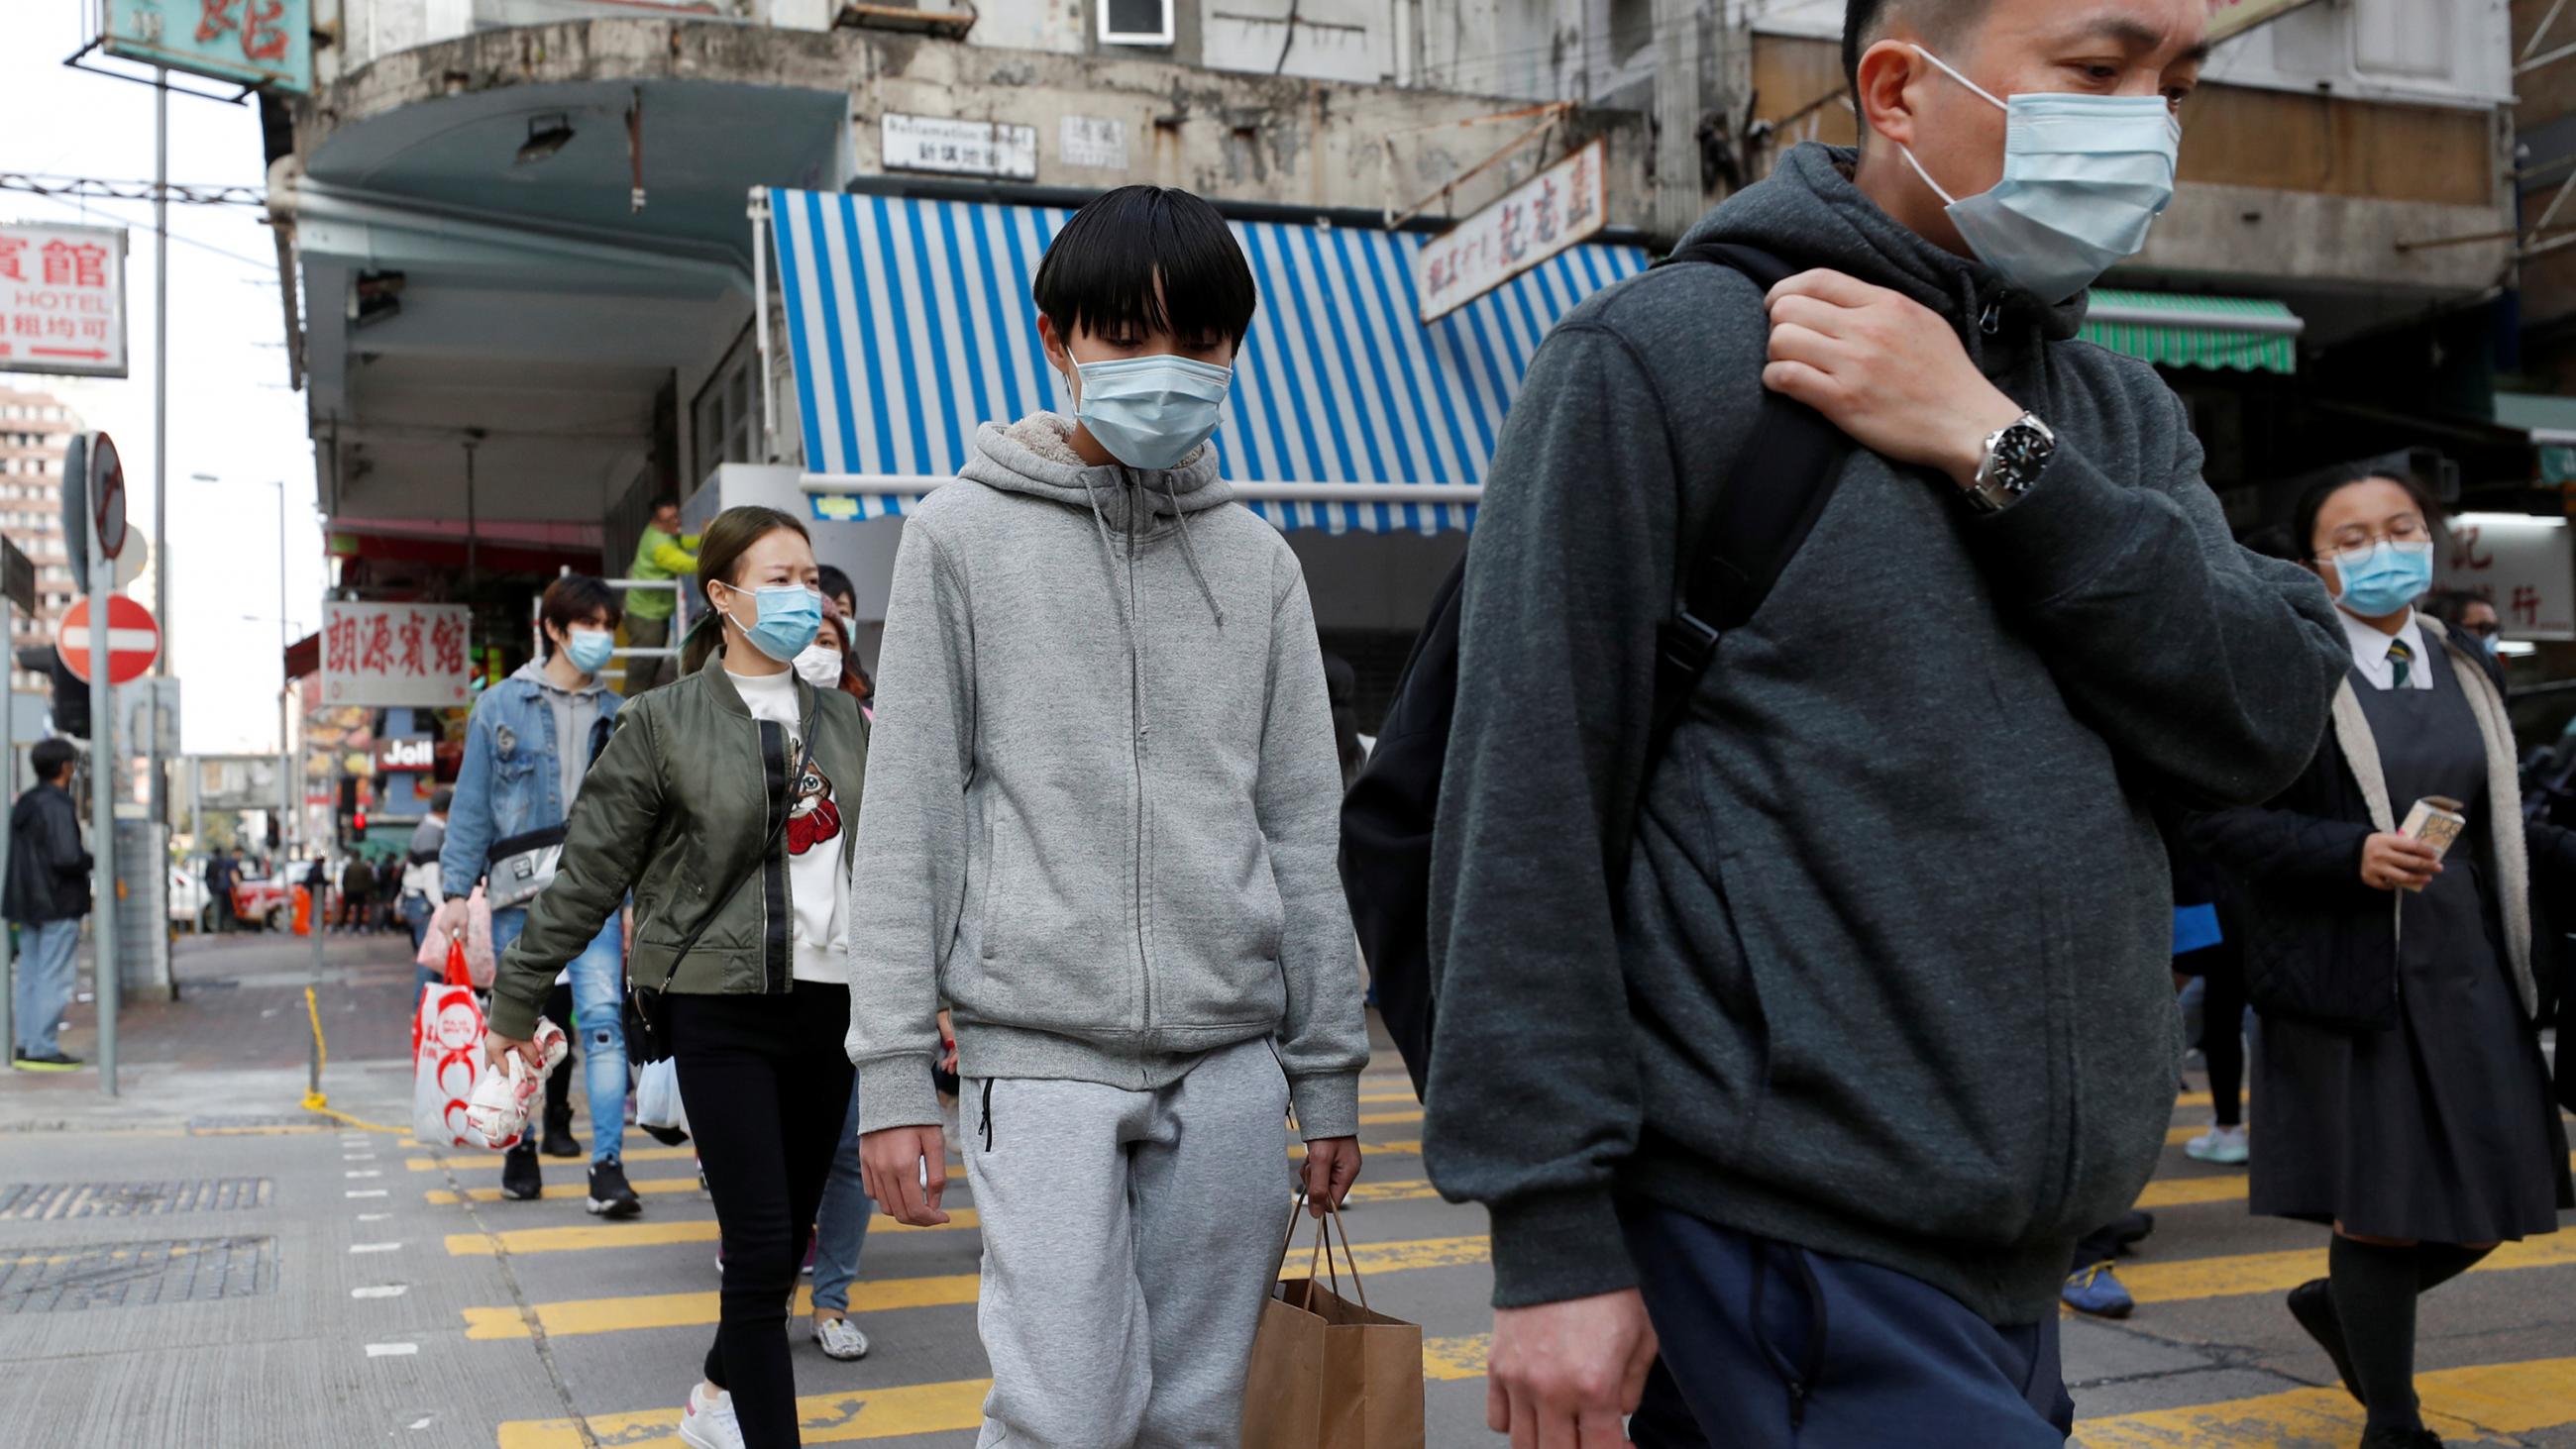 Photo shows a busy street in a shopping district with a number of people walking by the camera, all of whom are wearing masks. 